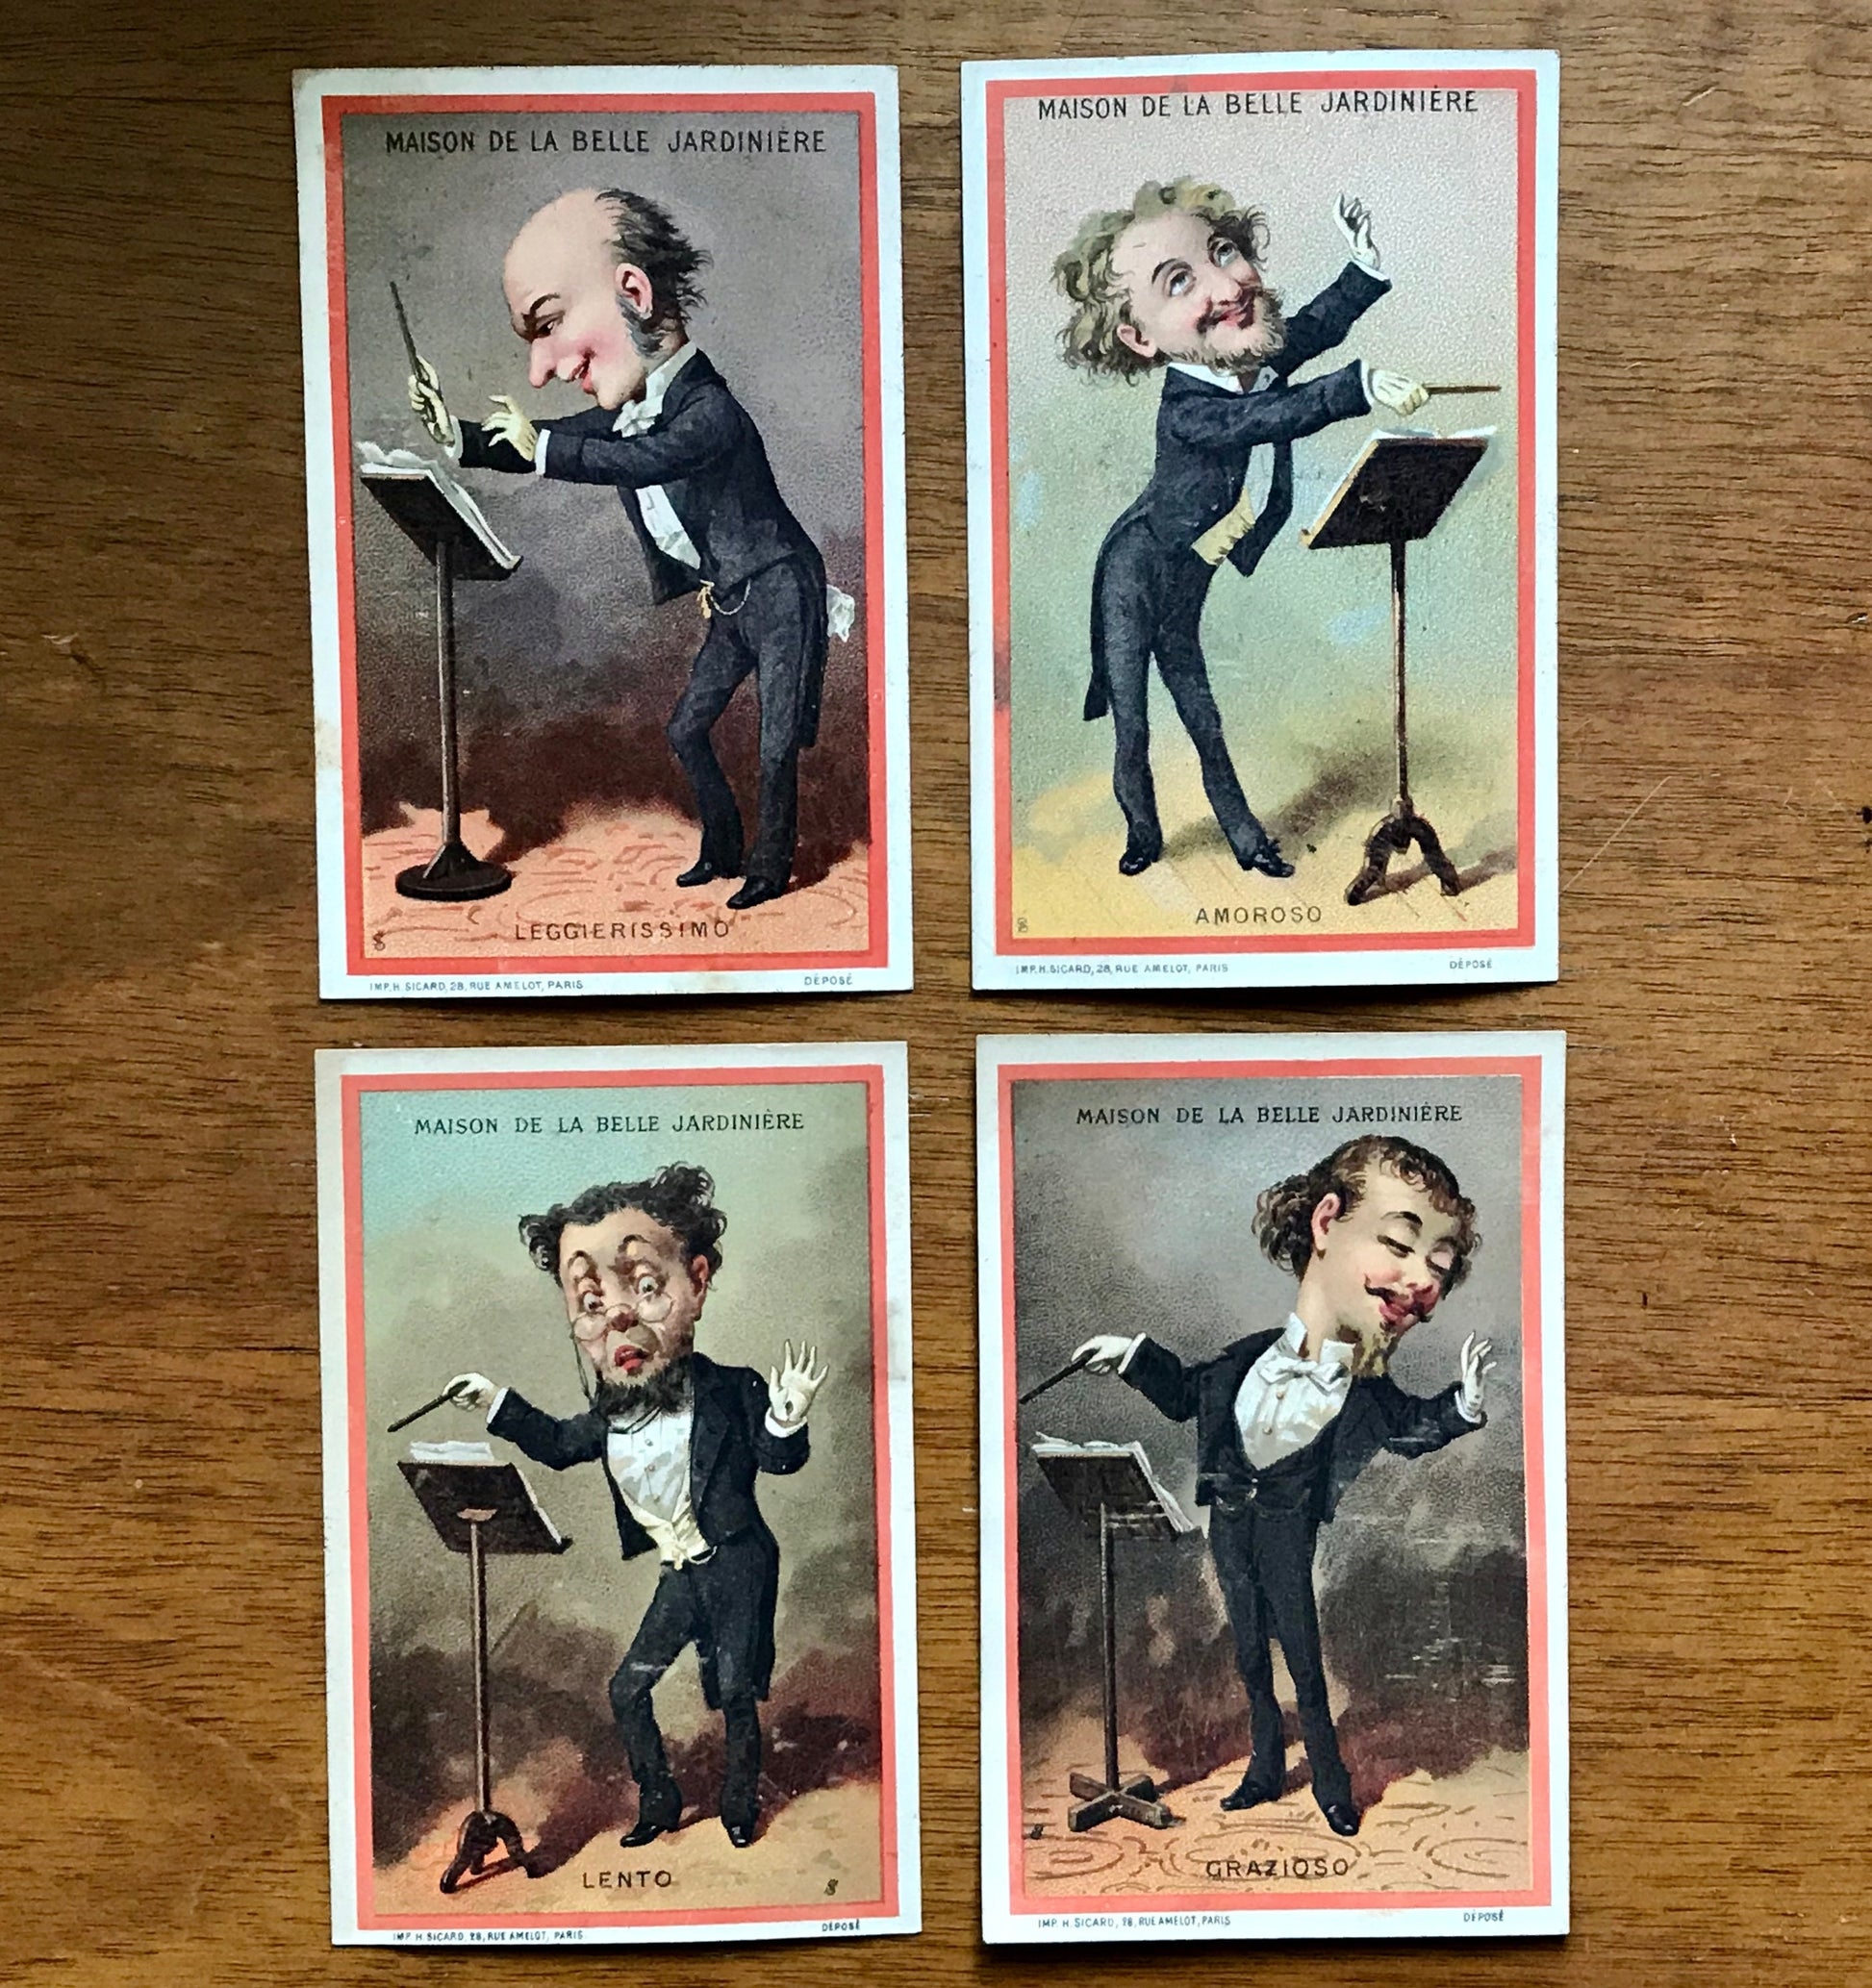 A Set of 8 French Trade Cards. Featuring conductors illustrating the mood of the music played. Dated 1878. Size: 12 x 8 cms.